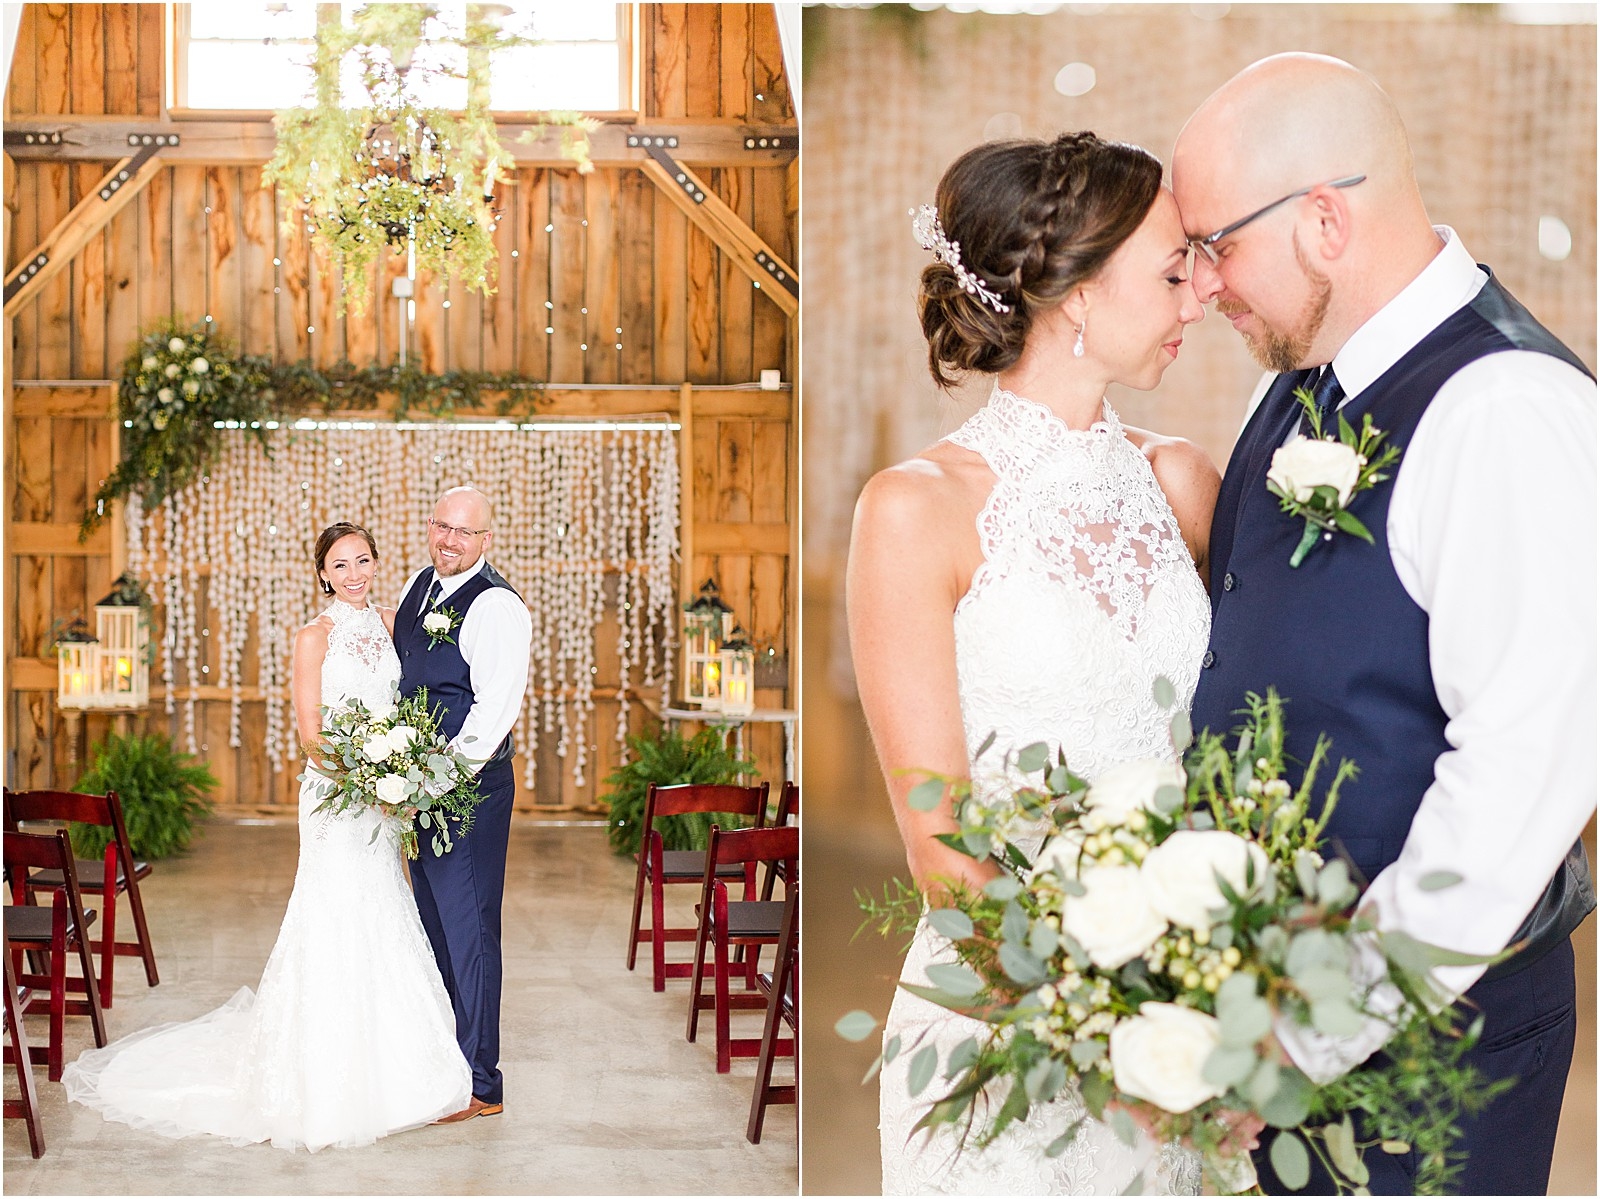 The Corner House Bed and Breakfast Wedding | Meagan and Michael076.jpg